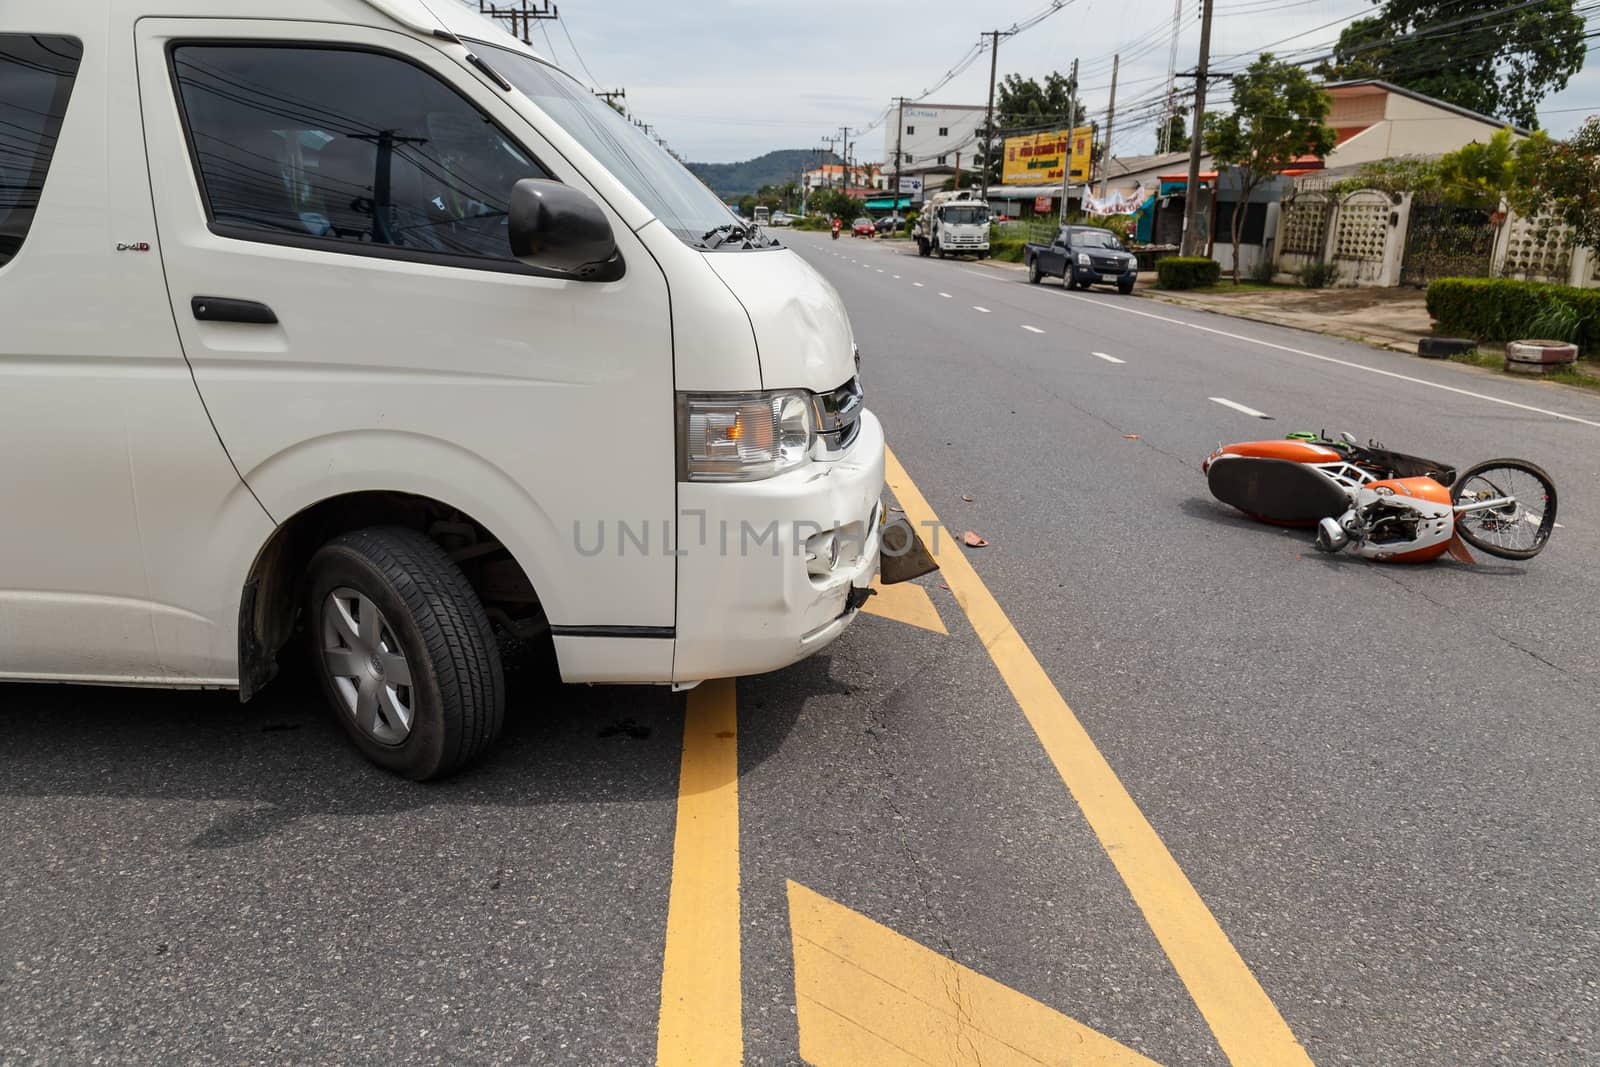 PHUKET, THAILAND - NOVEMBER 3 : Van accident on the road and crashed with motorcycle which causing the rider serious injury. November 3, 2014 in Phuket Thailand.